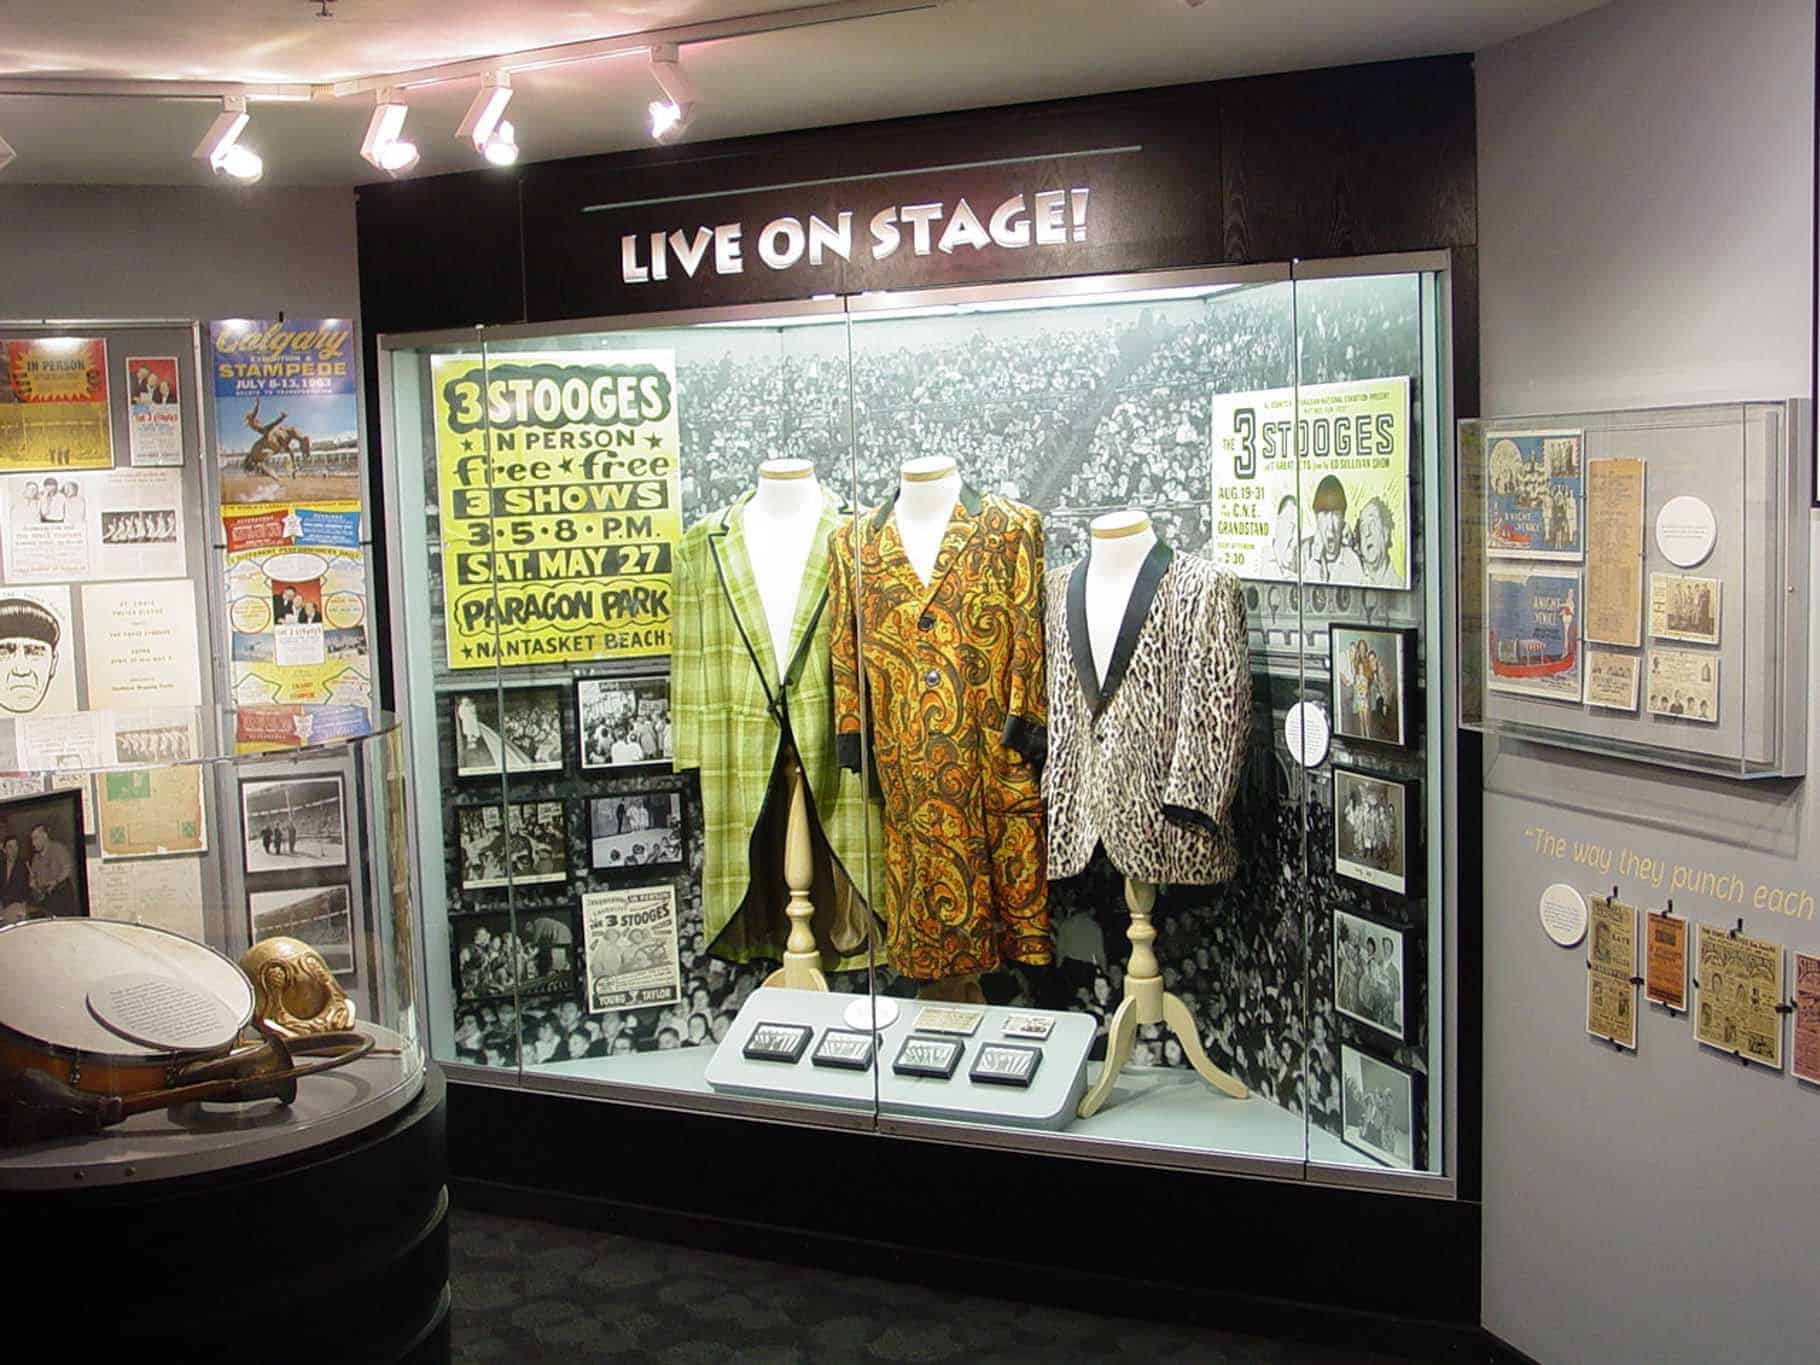 Cases of costumes and movie props actually used in the television shows and feature films.